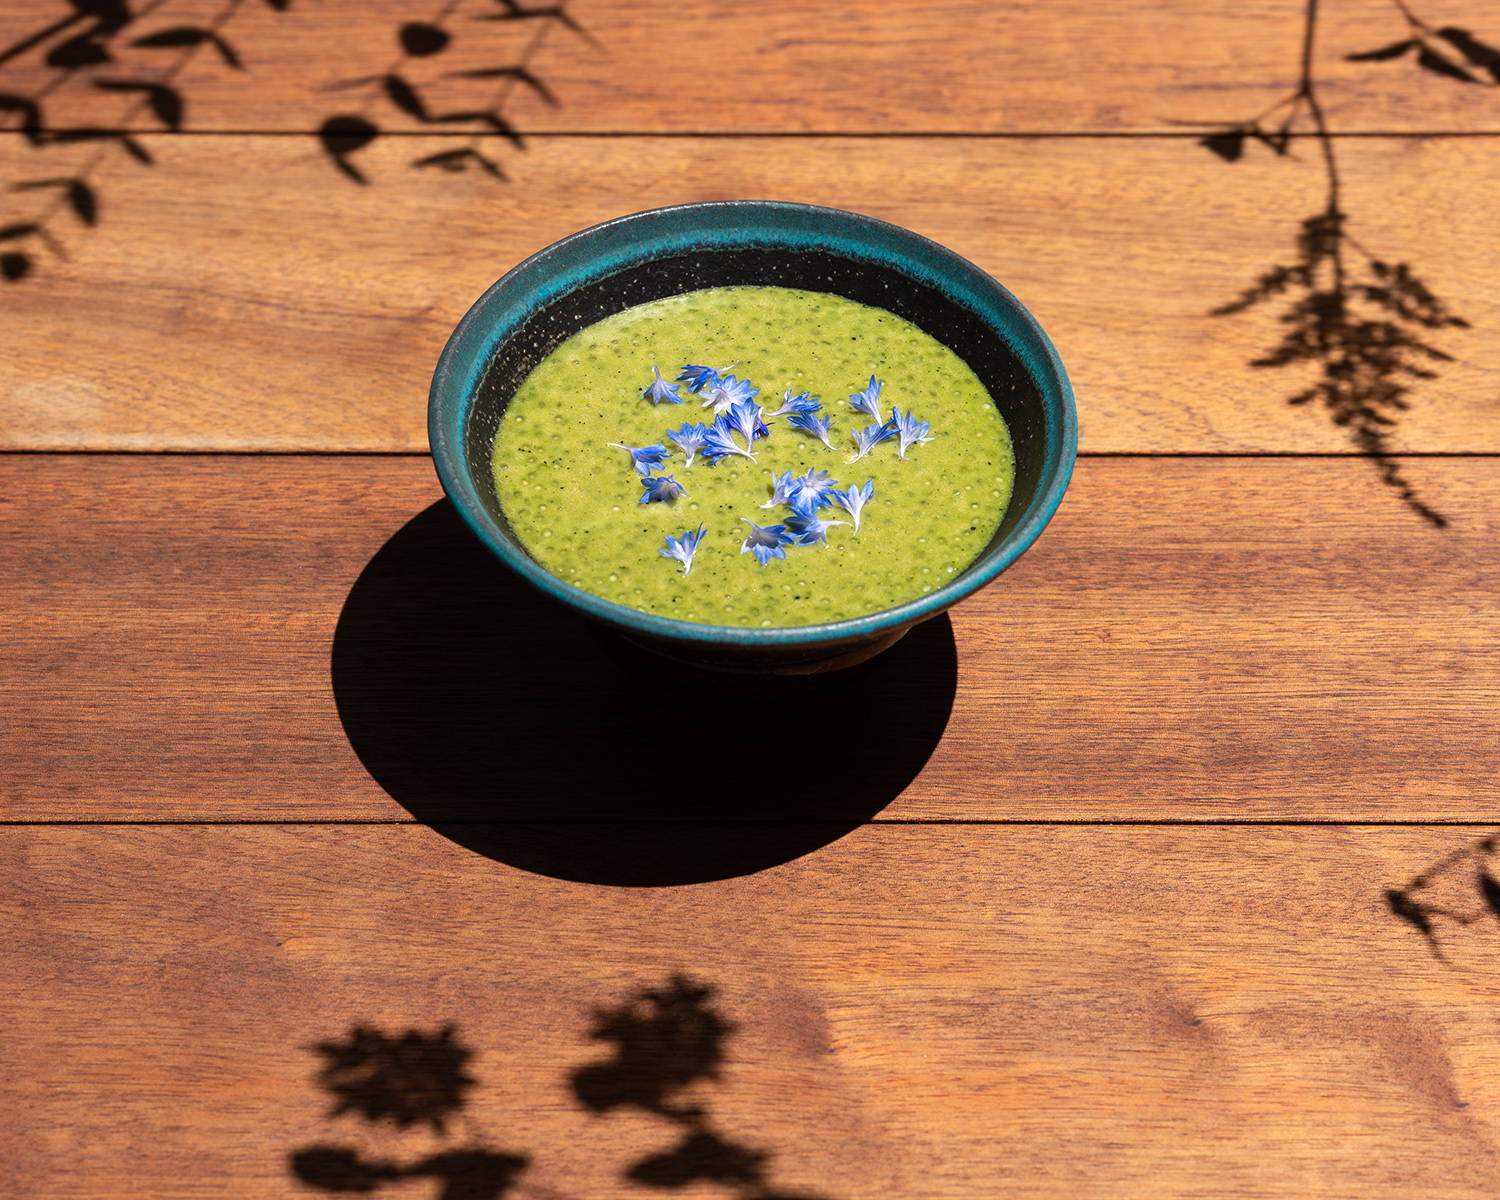 A bowl of jade-colored matcha tapioca, garnished with purple flowers.